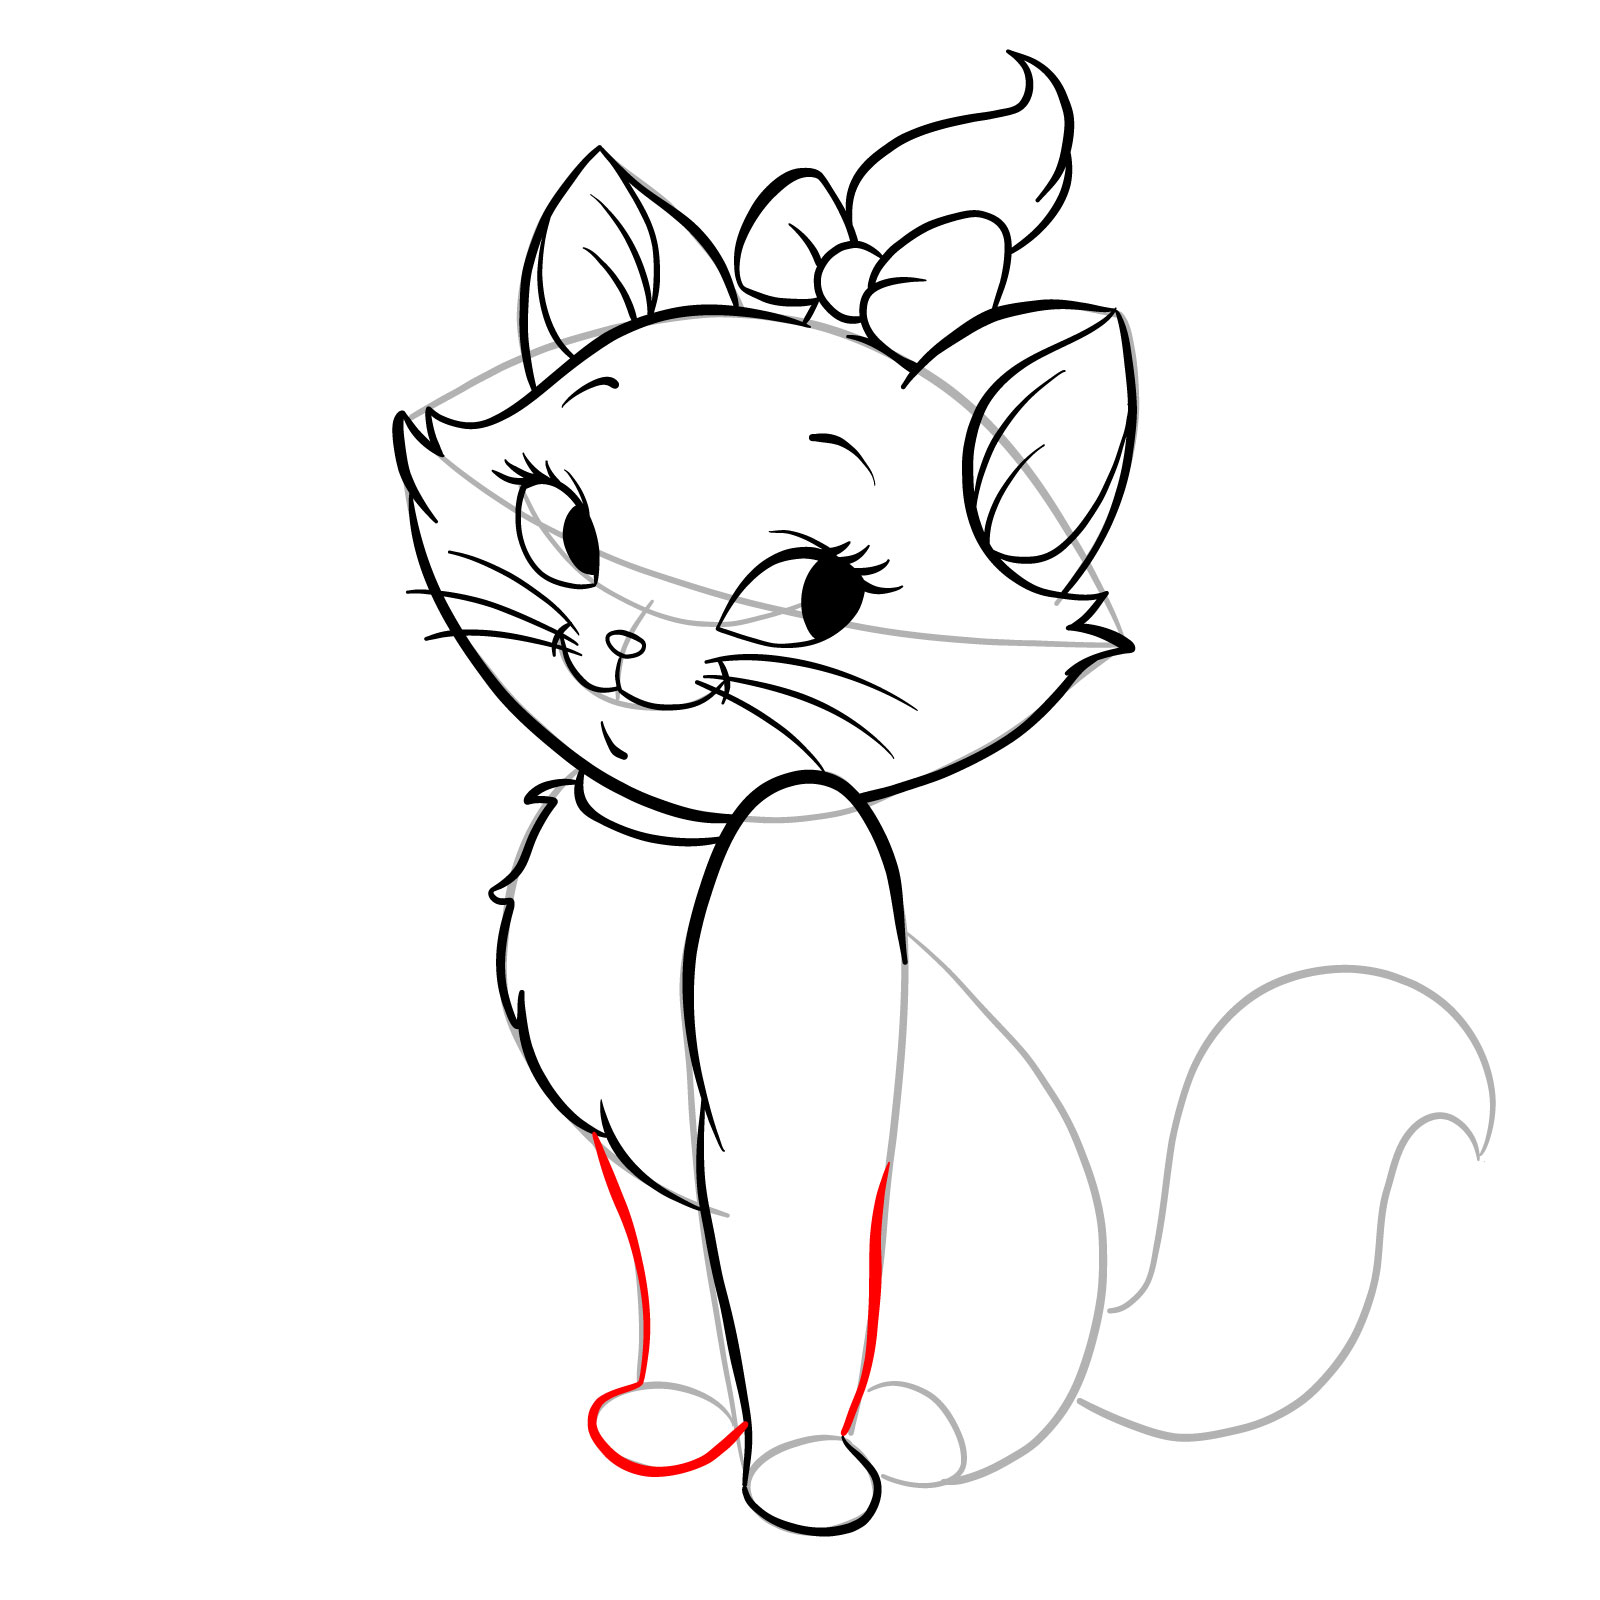 How to draw Marie from The Aristocats - step 19